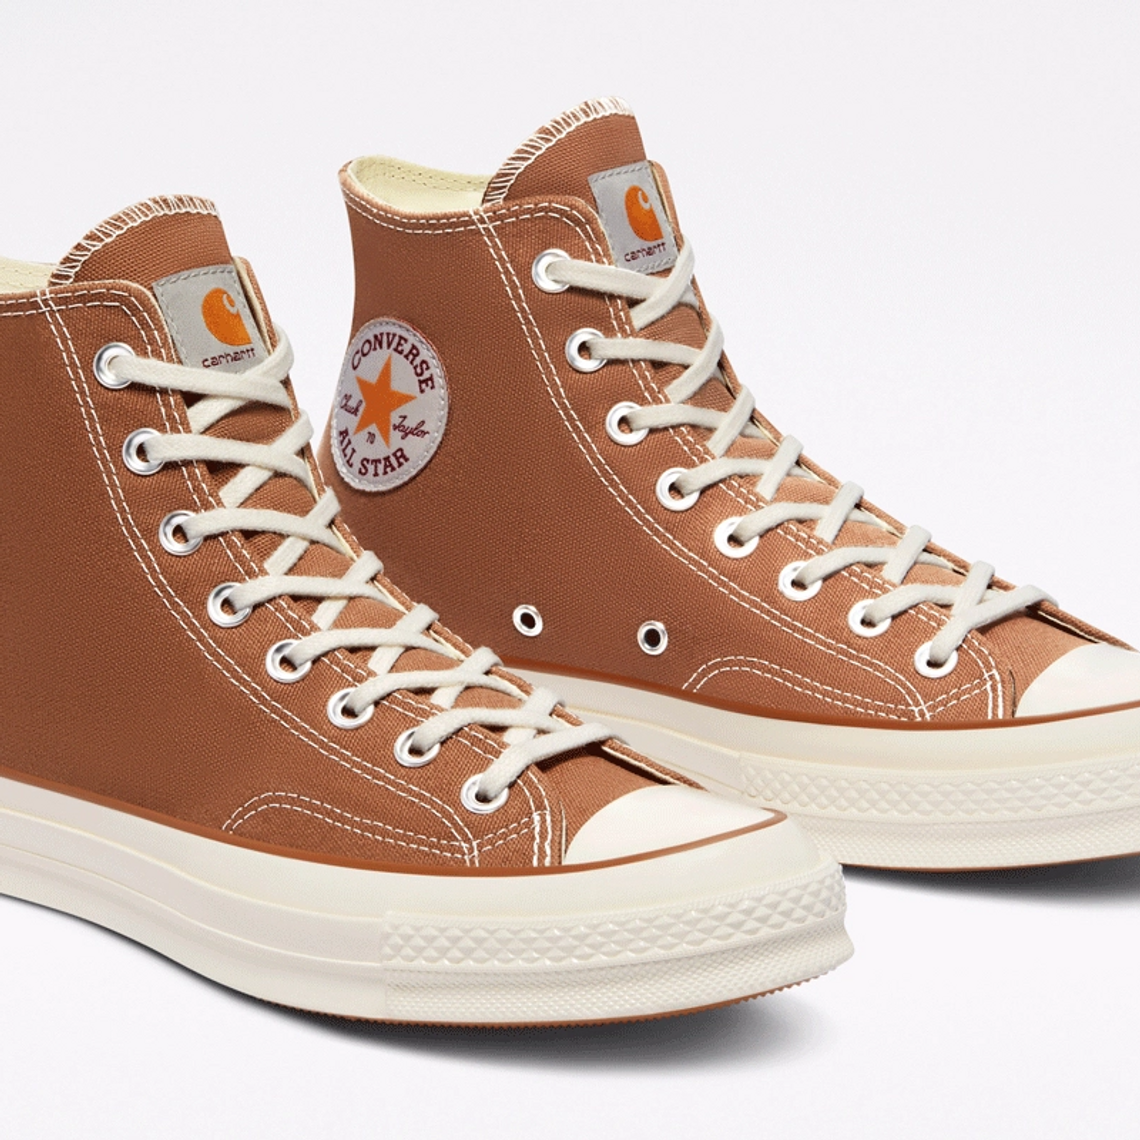 Carhartt WIP and Converse Continue Chuck 70 Colabs - Sneaker Freaker